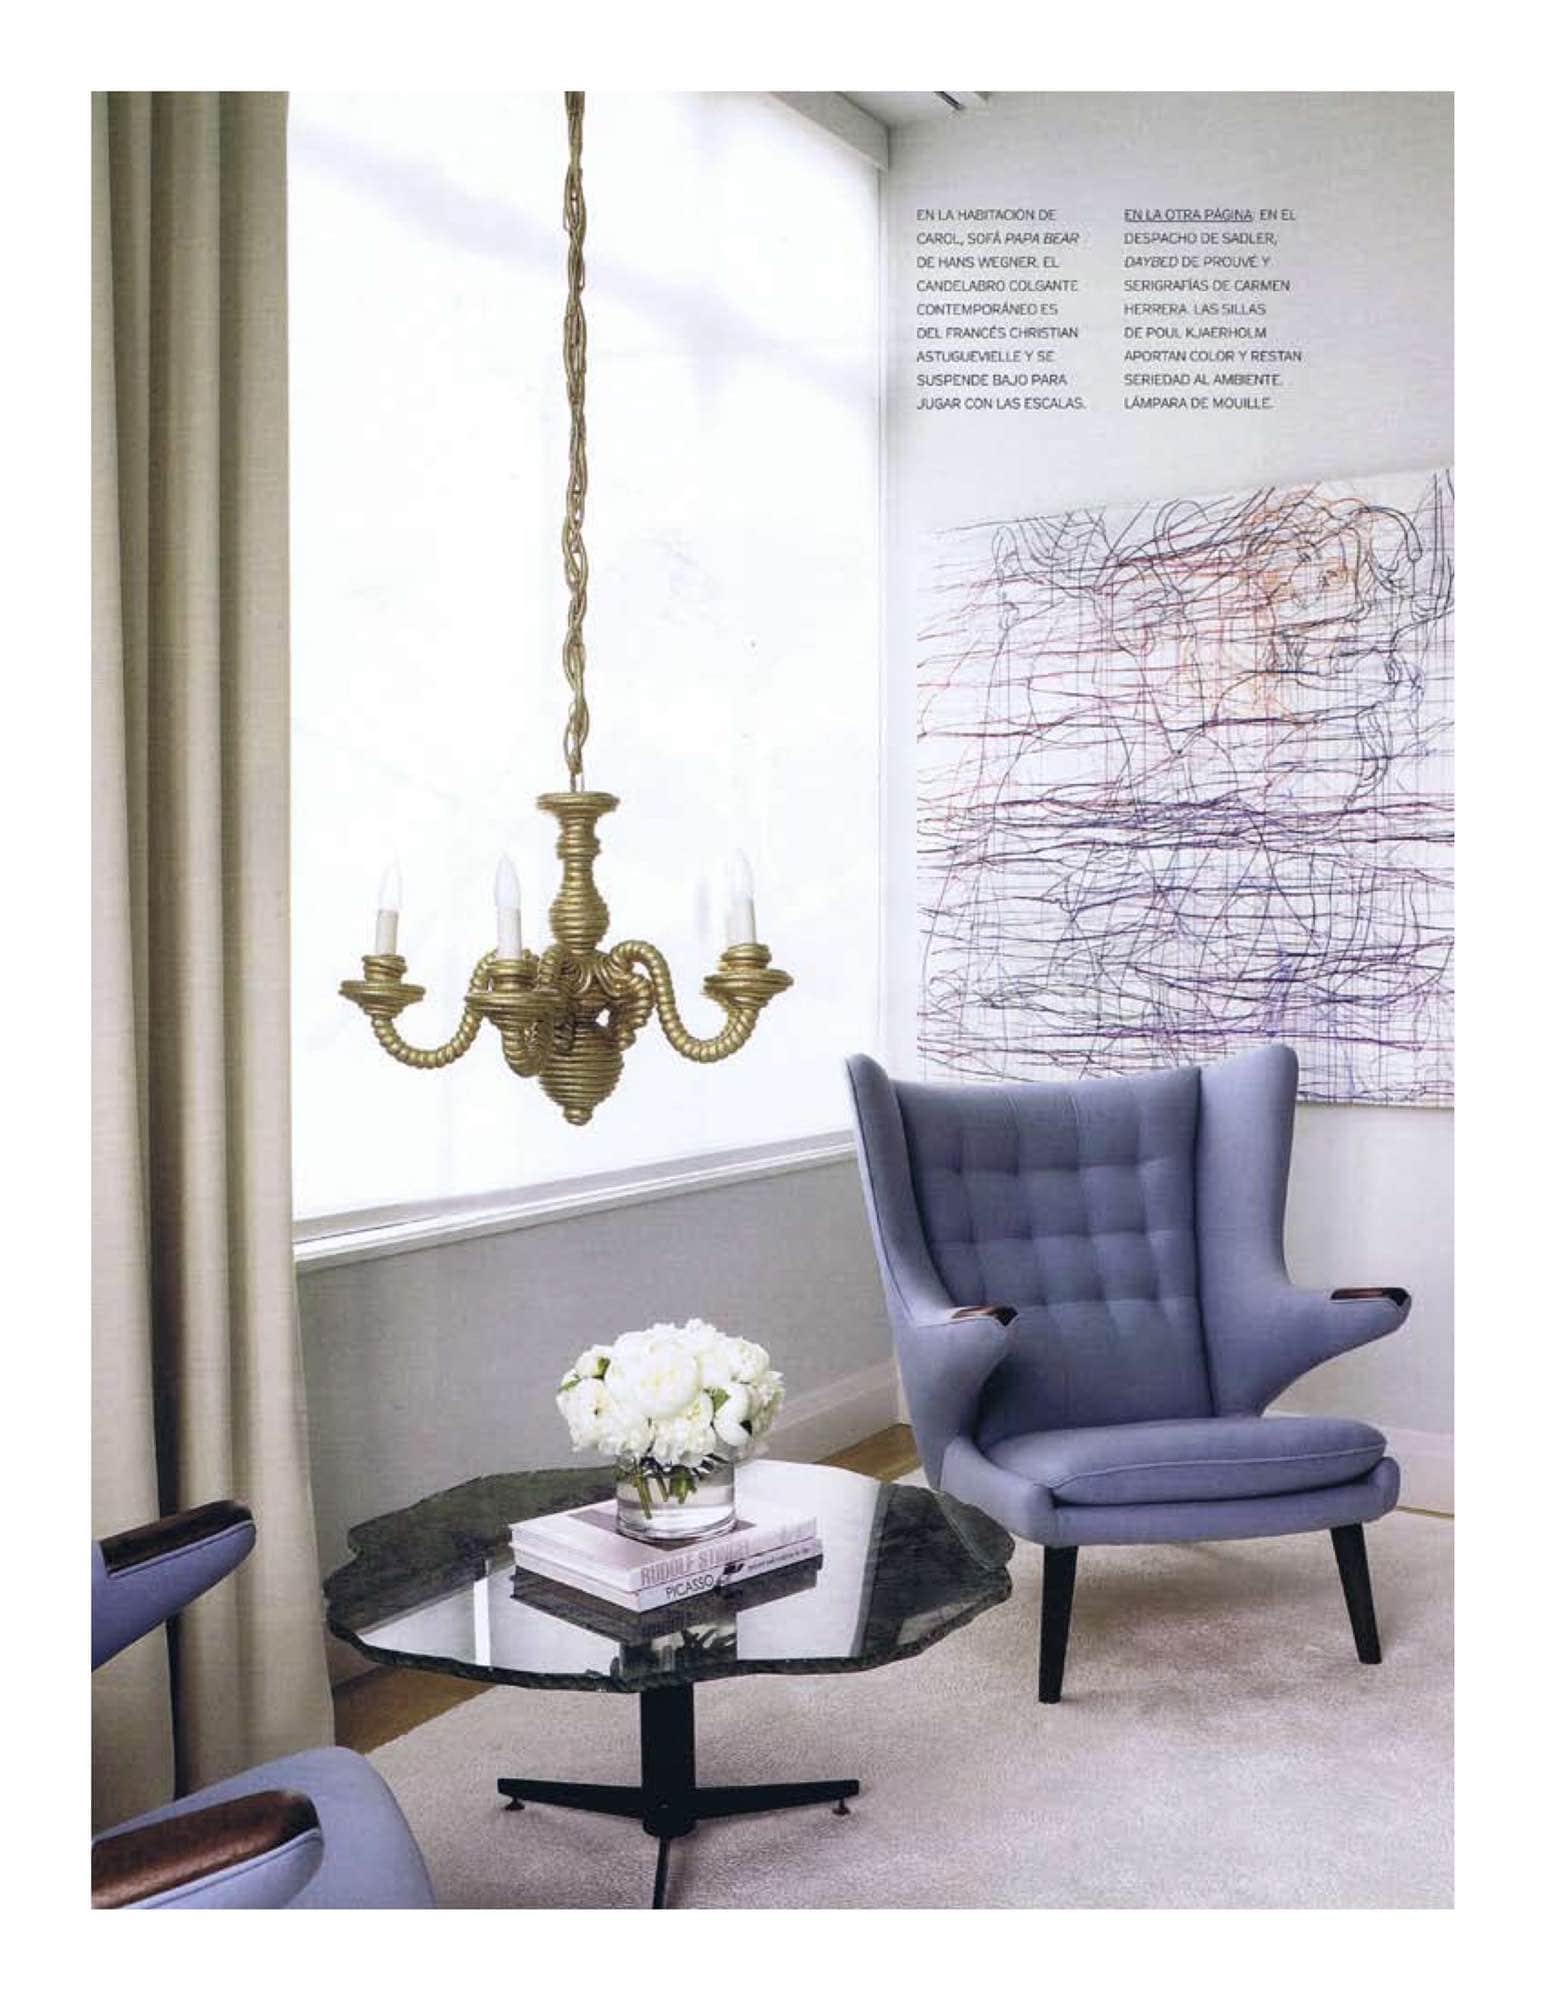 Master bedroom designed by Carol Egan Inteiors with Hans J. Wgner "Papa Bear" chair, contemporary rope chandelier by Christian Astuguevieille and artwork is by Ghada Amer.